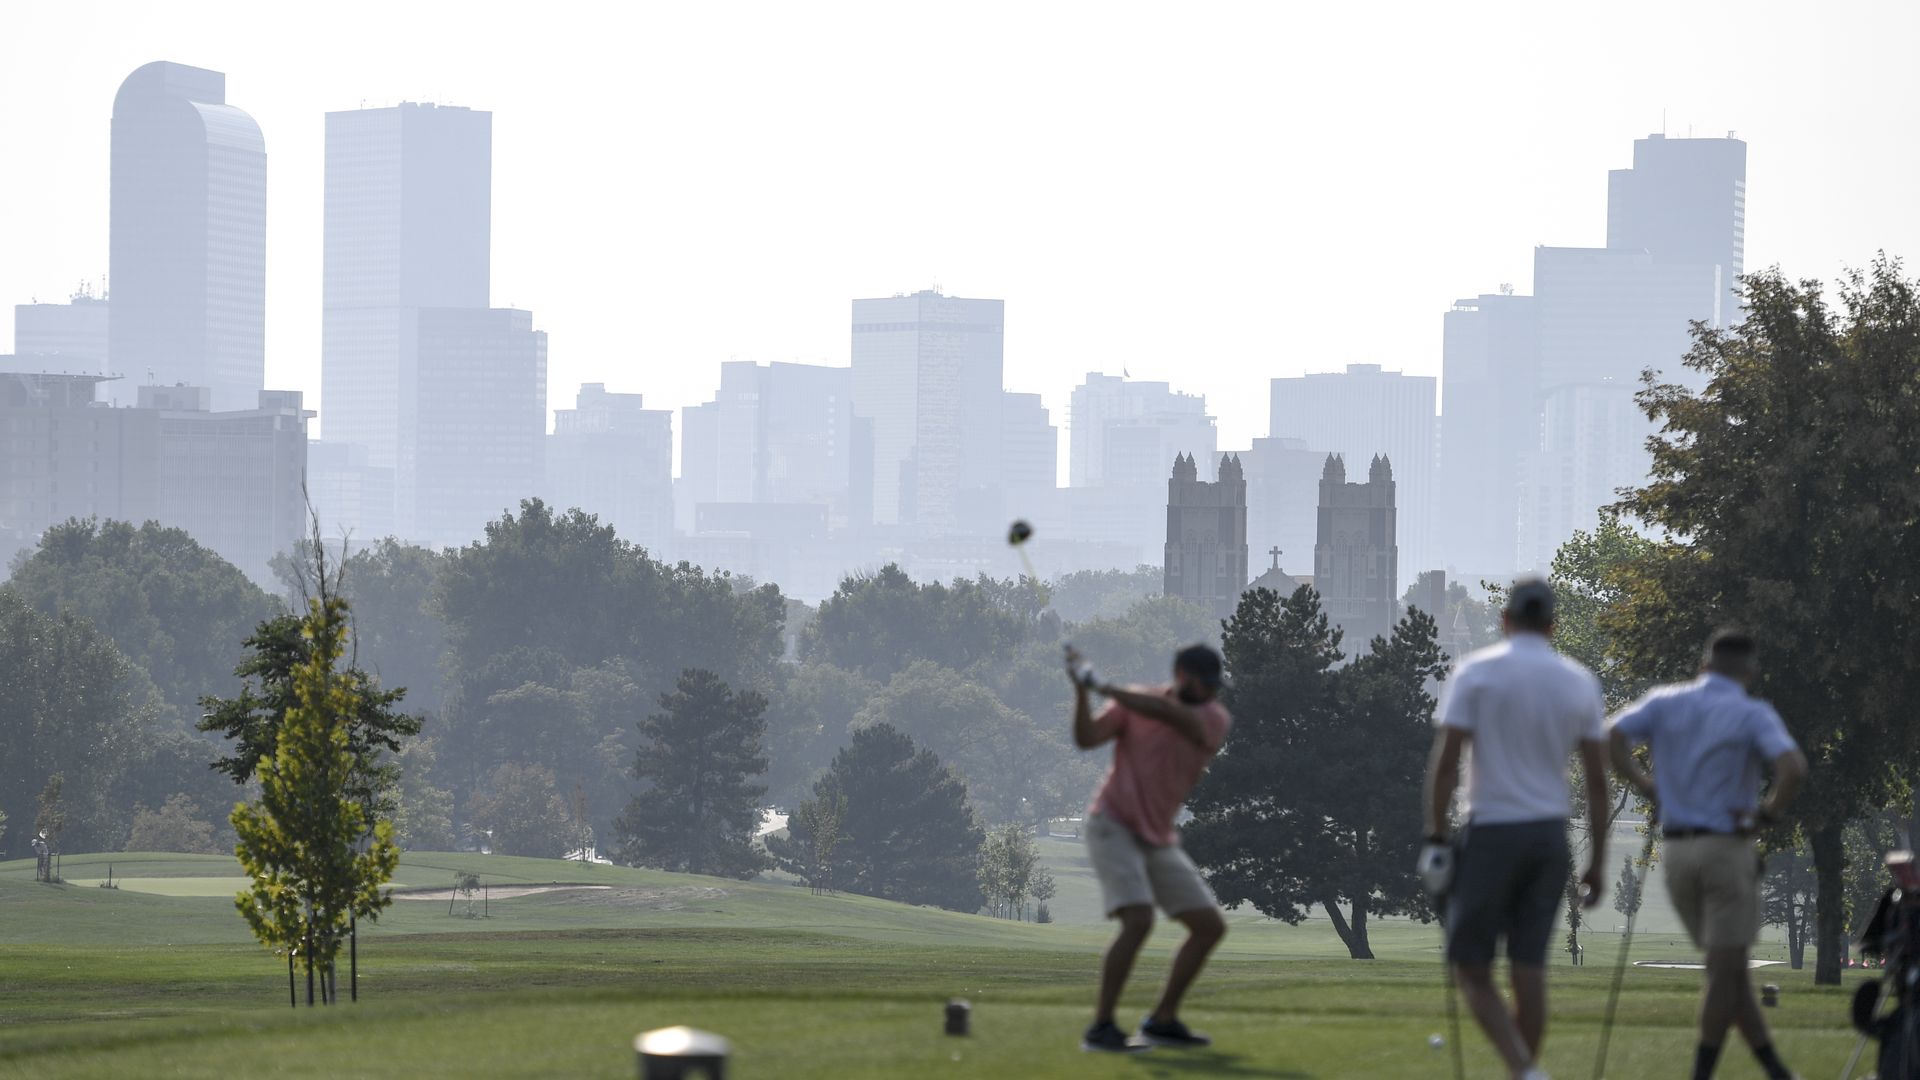 A man prepares to swing a golf club while two other man watch during a sunny but hazy day at a golf course. 